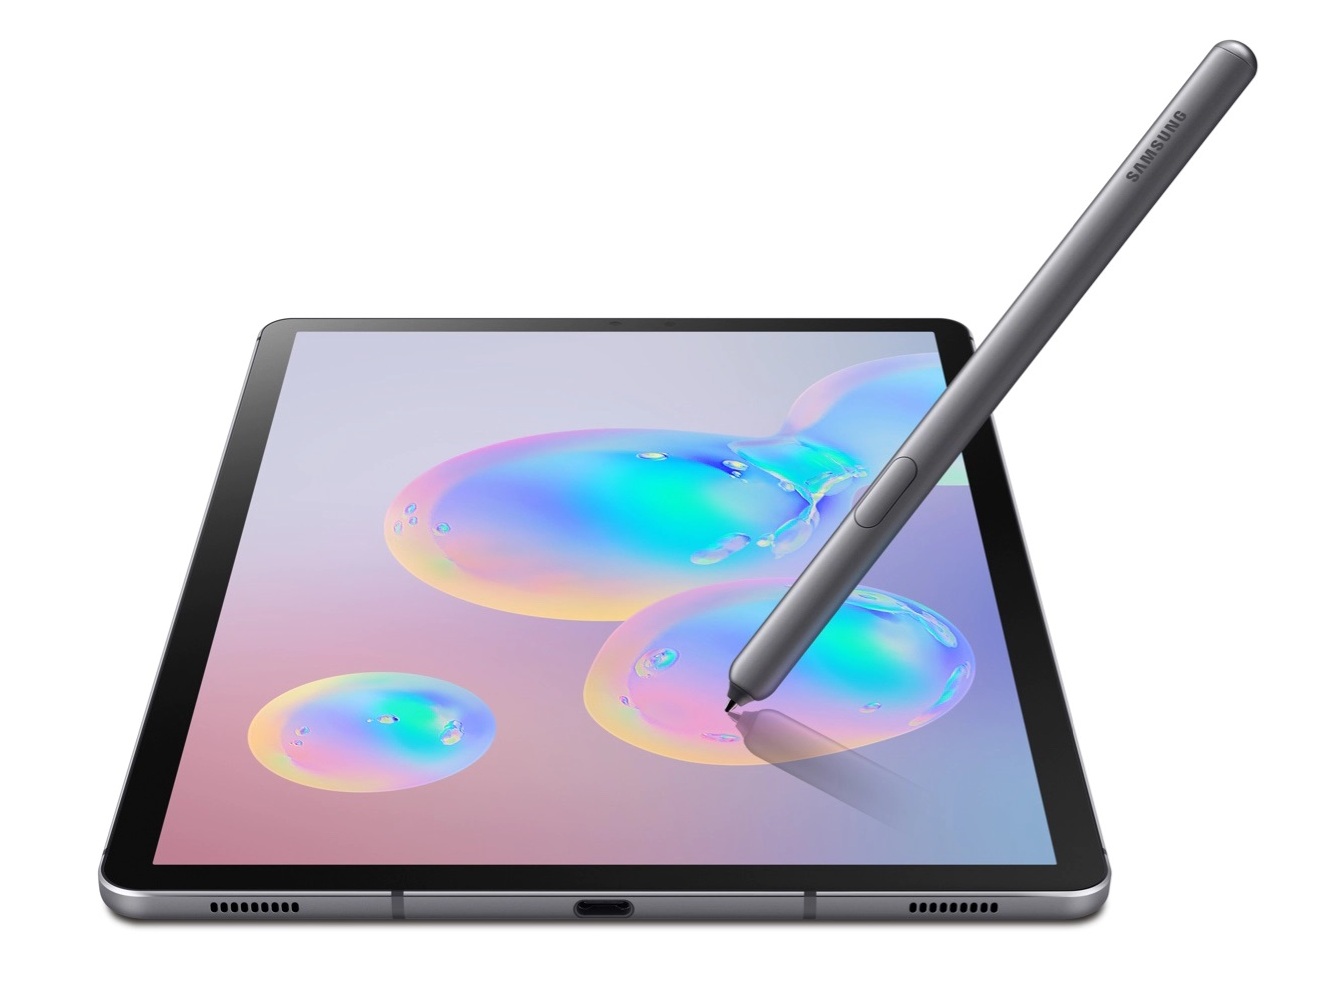 Samsung’s cleaning stock on its Galaxy Tab S6 10.5 for only $ 430 USD